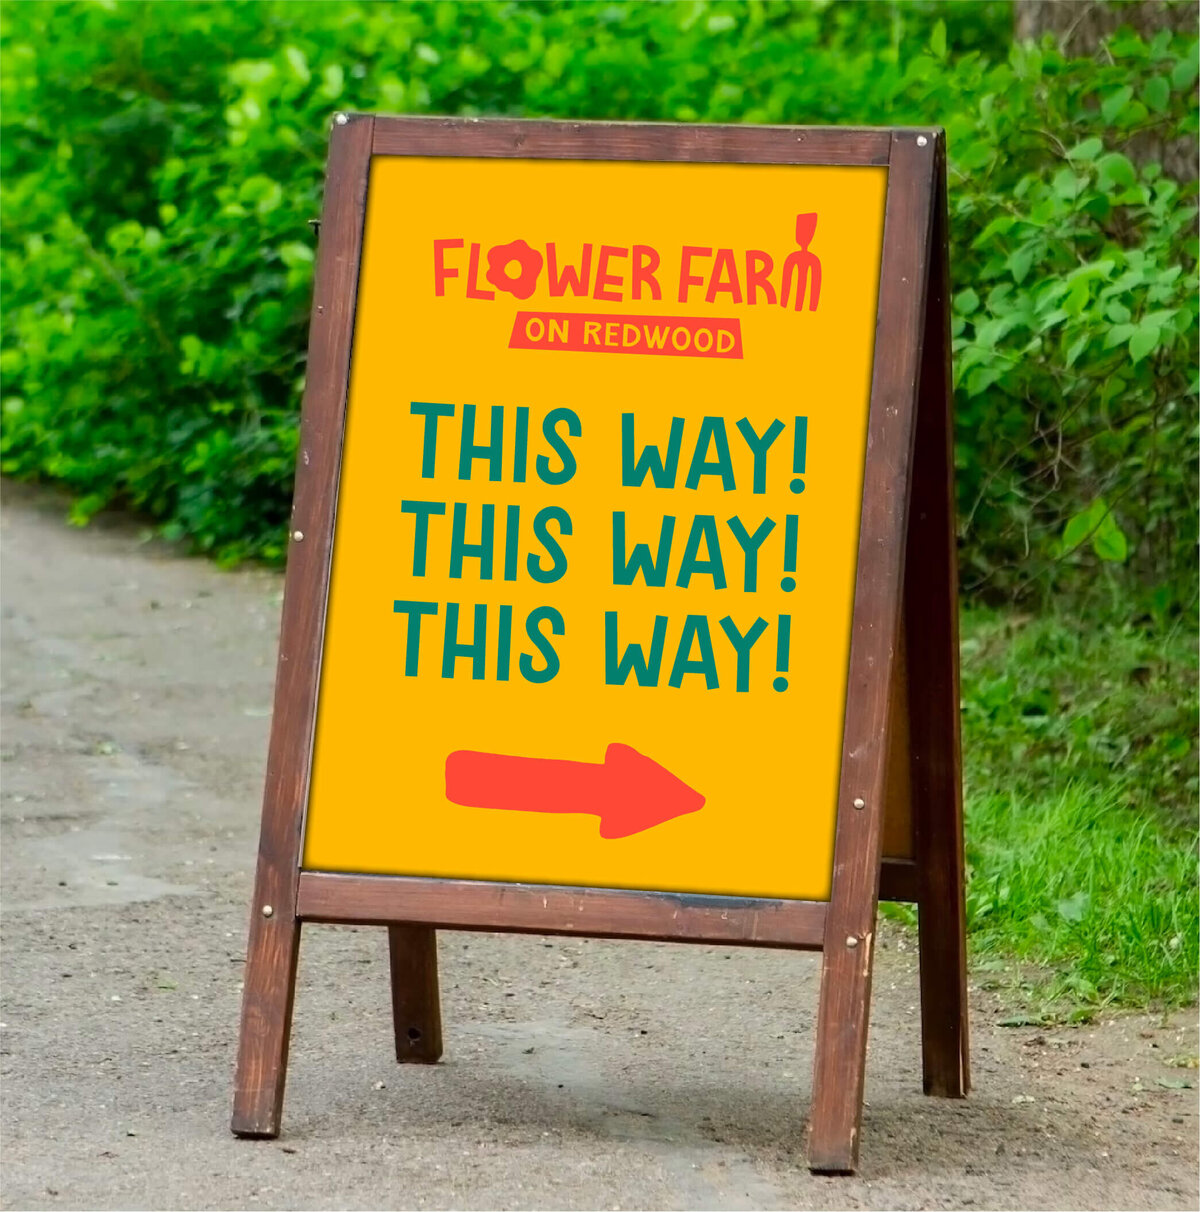 This way sign with arrow for flower farm on redwood